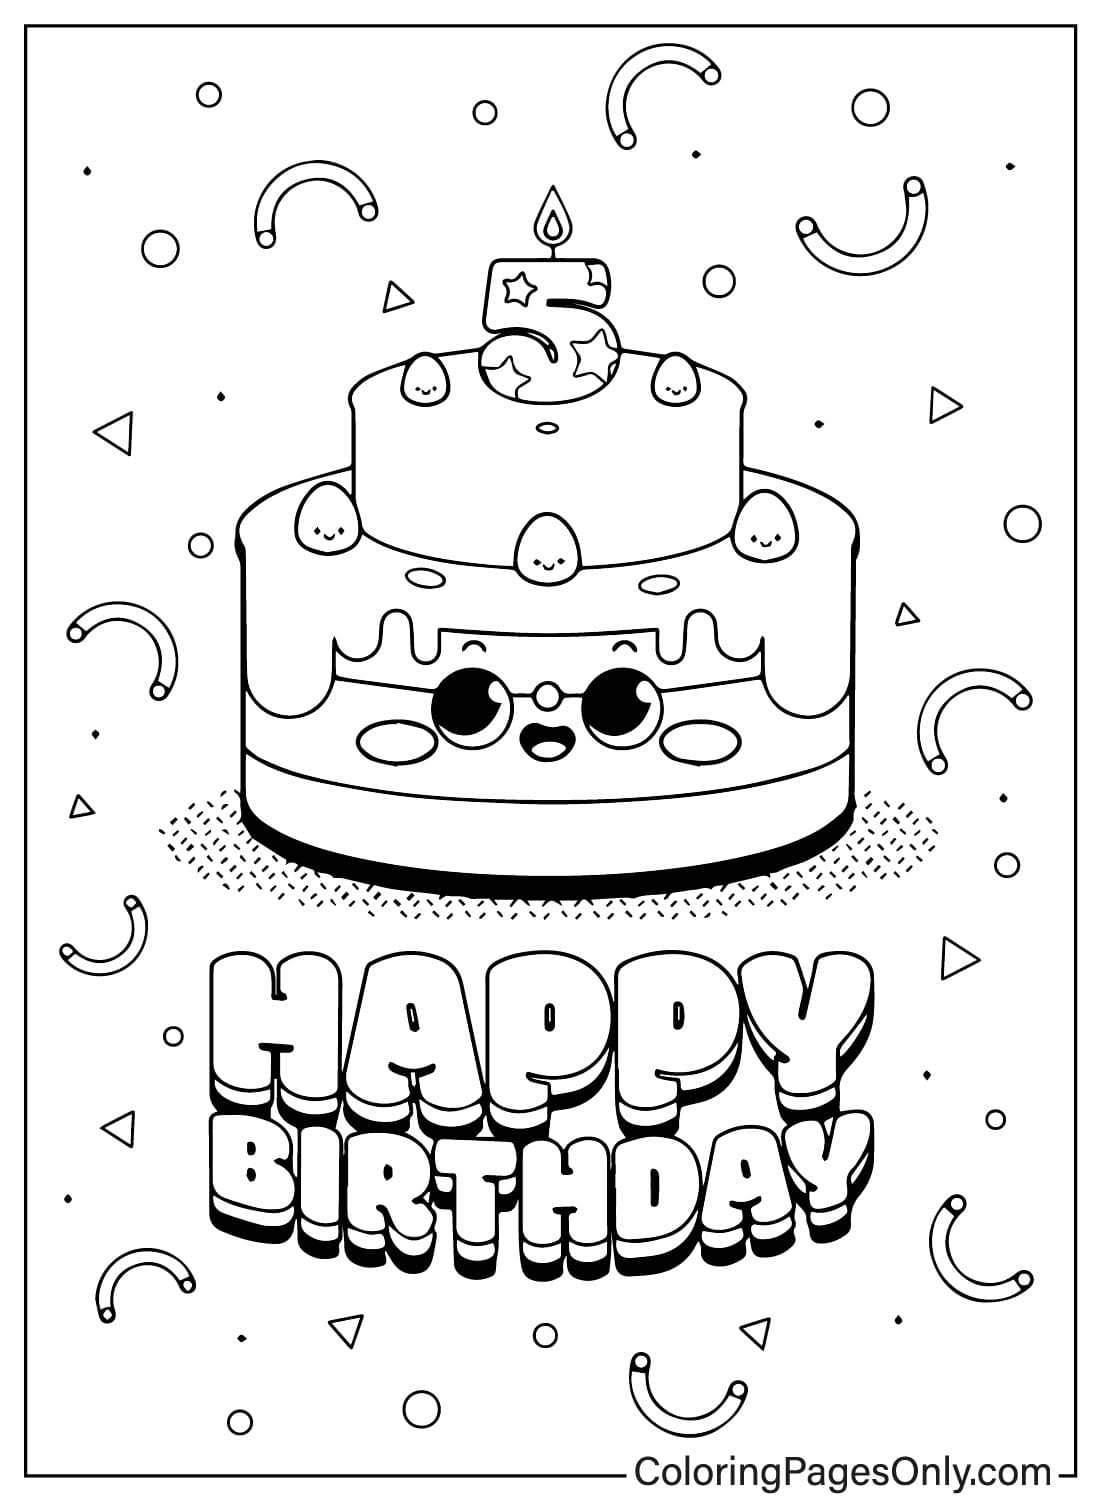 Birthday Cake Images to Color from Birthday Cake